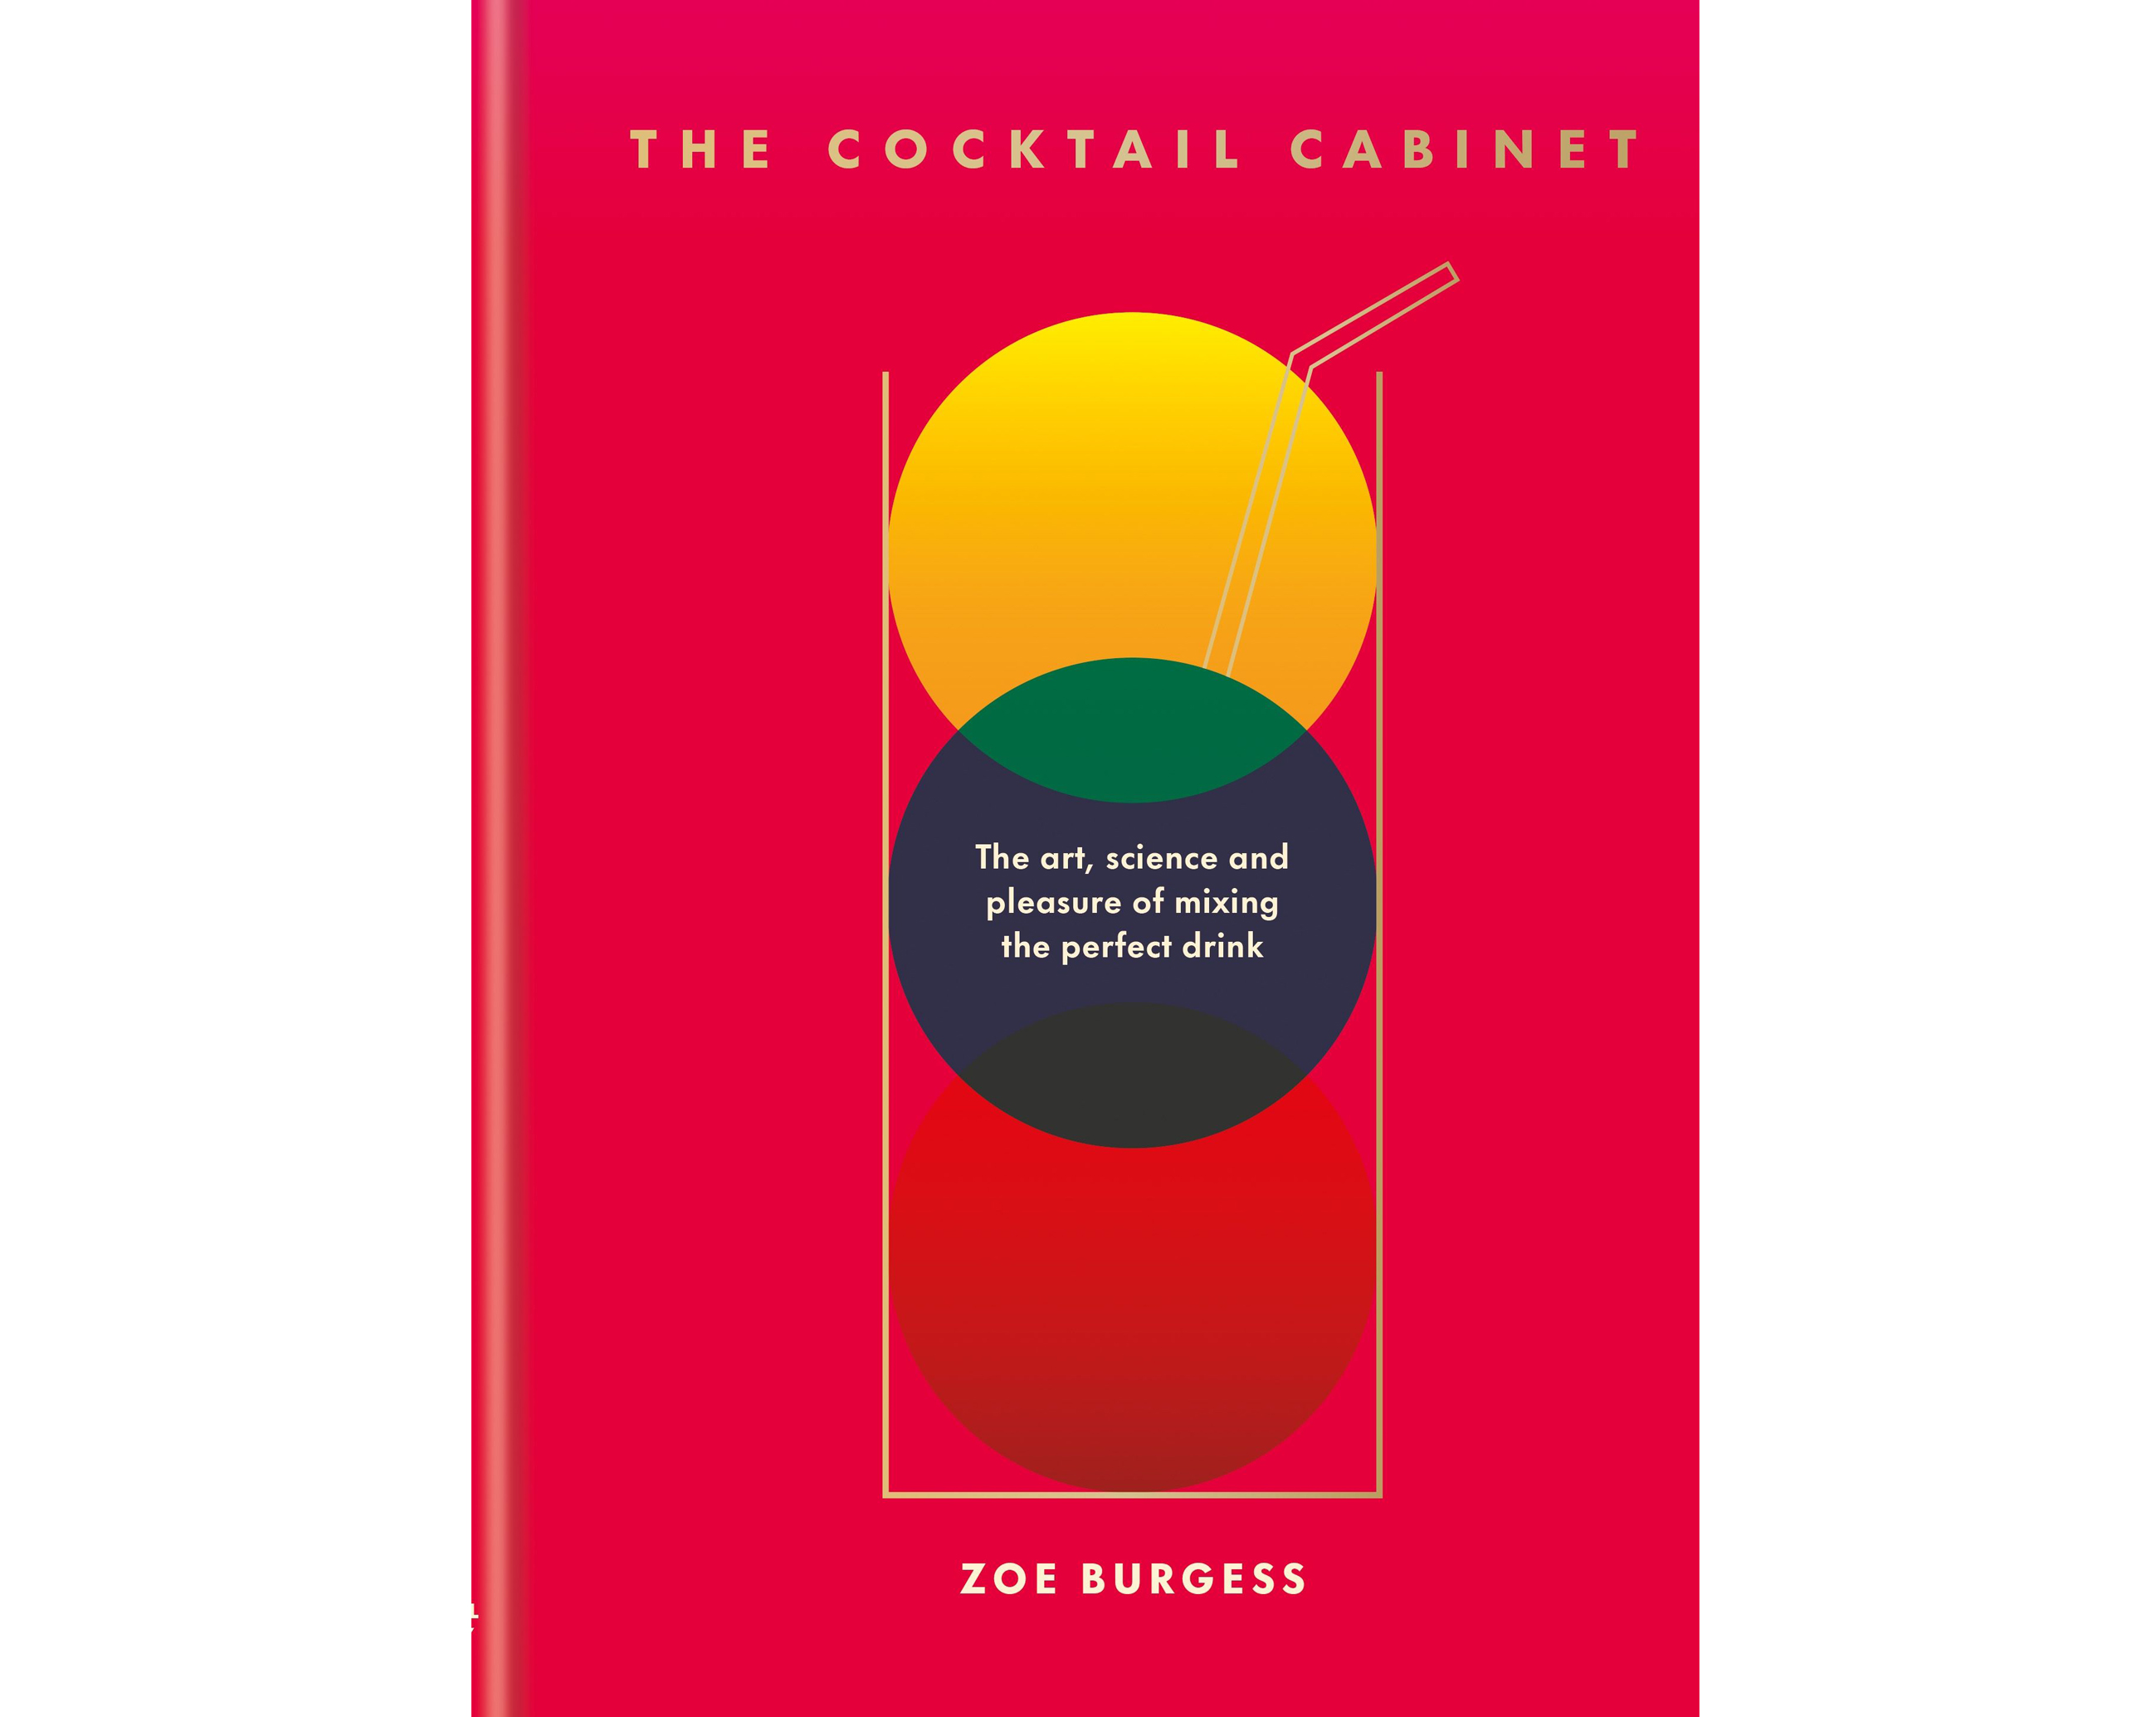 The Cocktail Cabinet: The art, science and pleasure of mixing the perfect drink. By Zoe Burgess